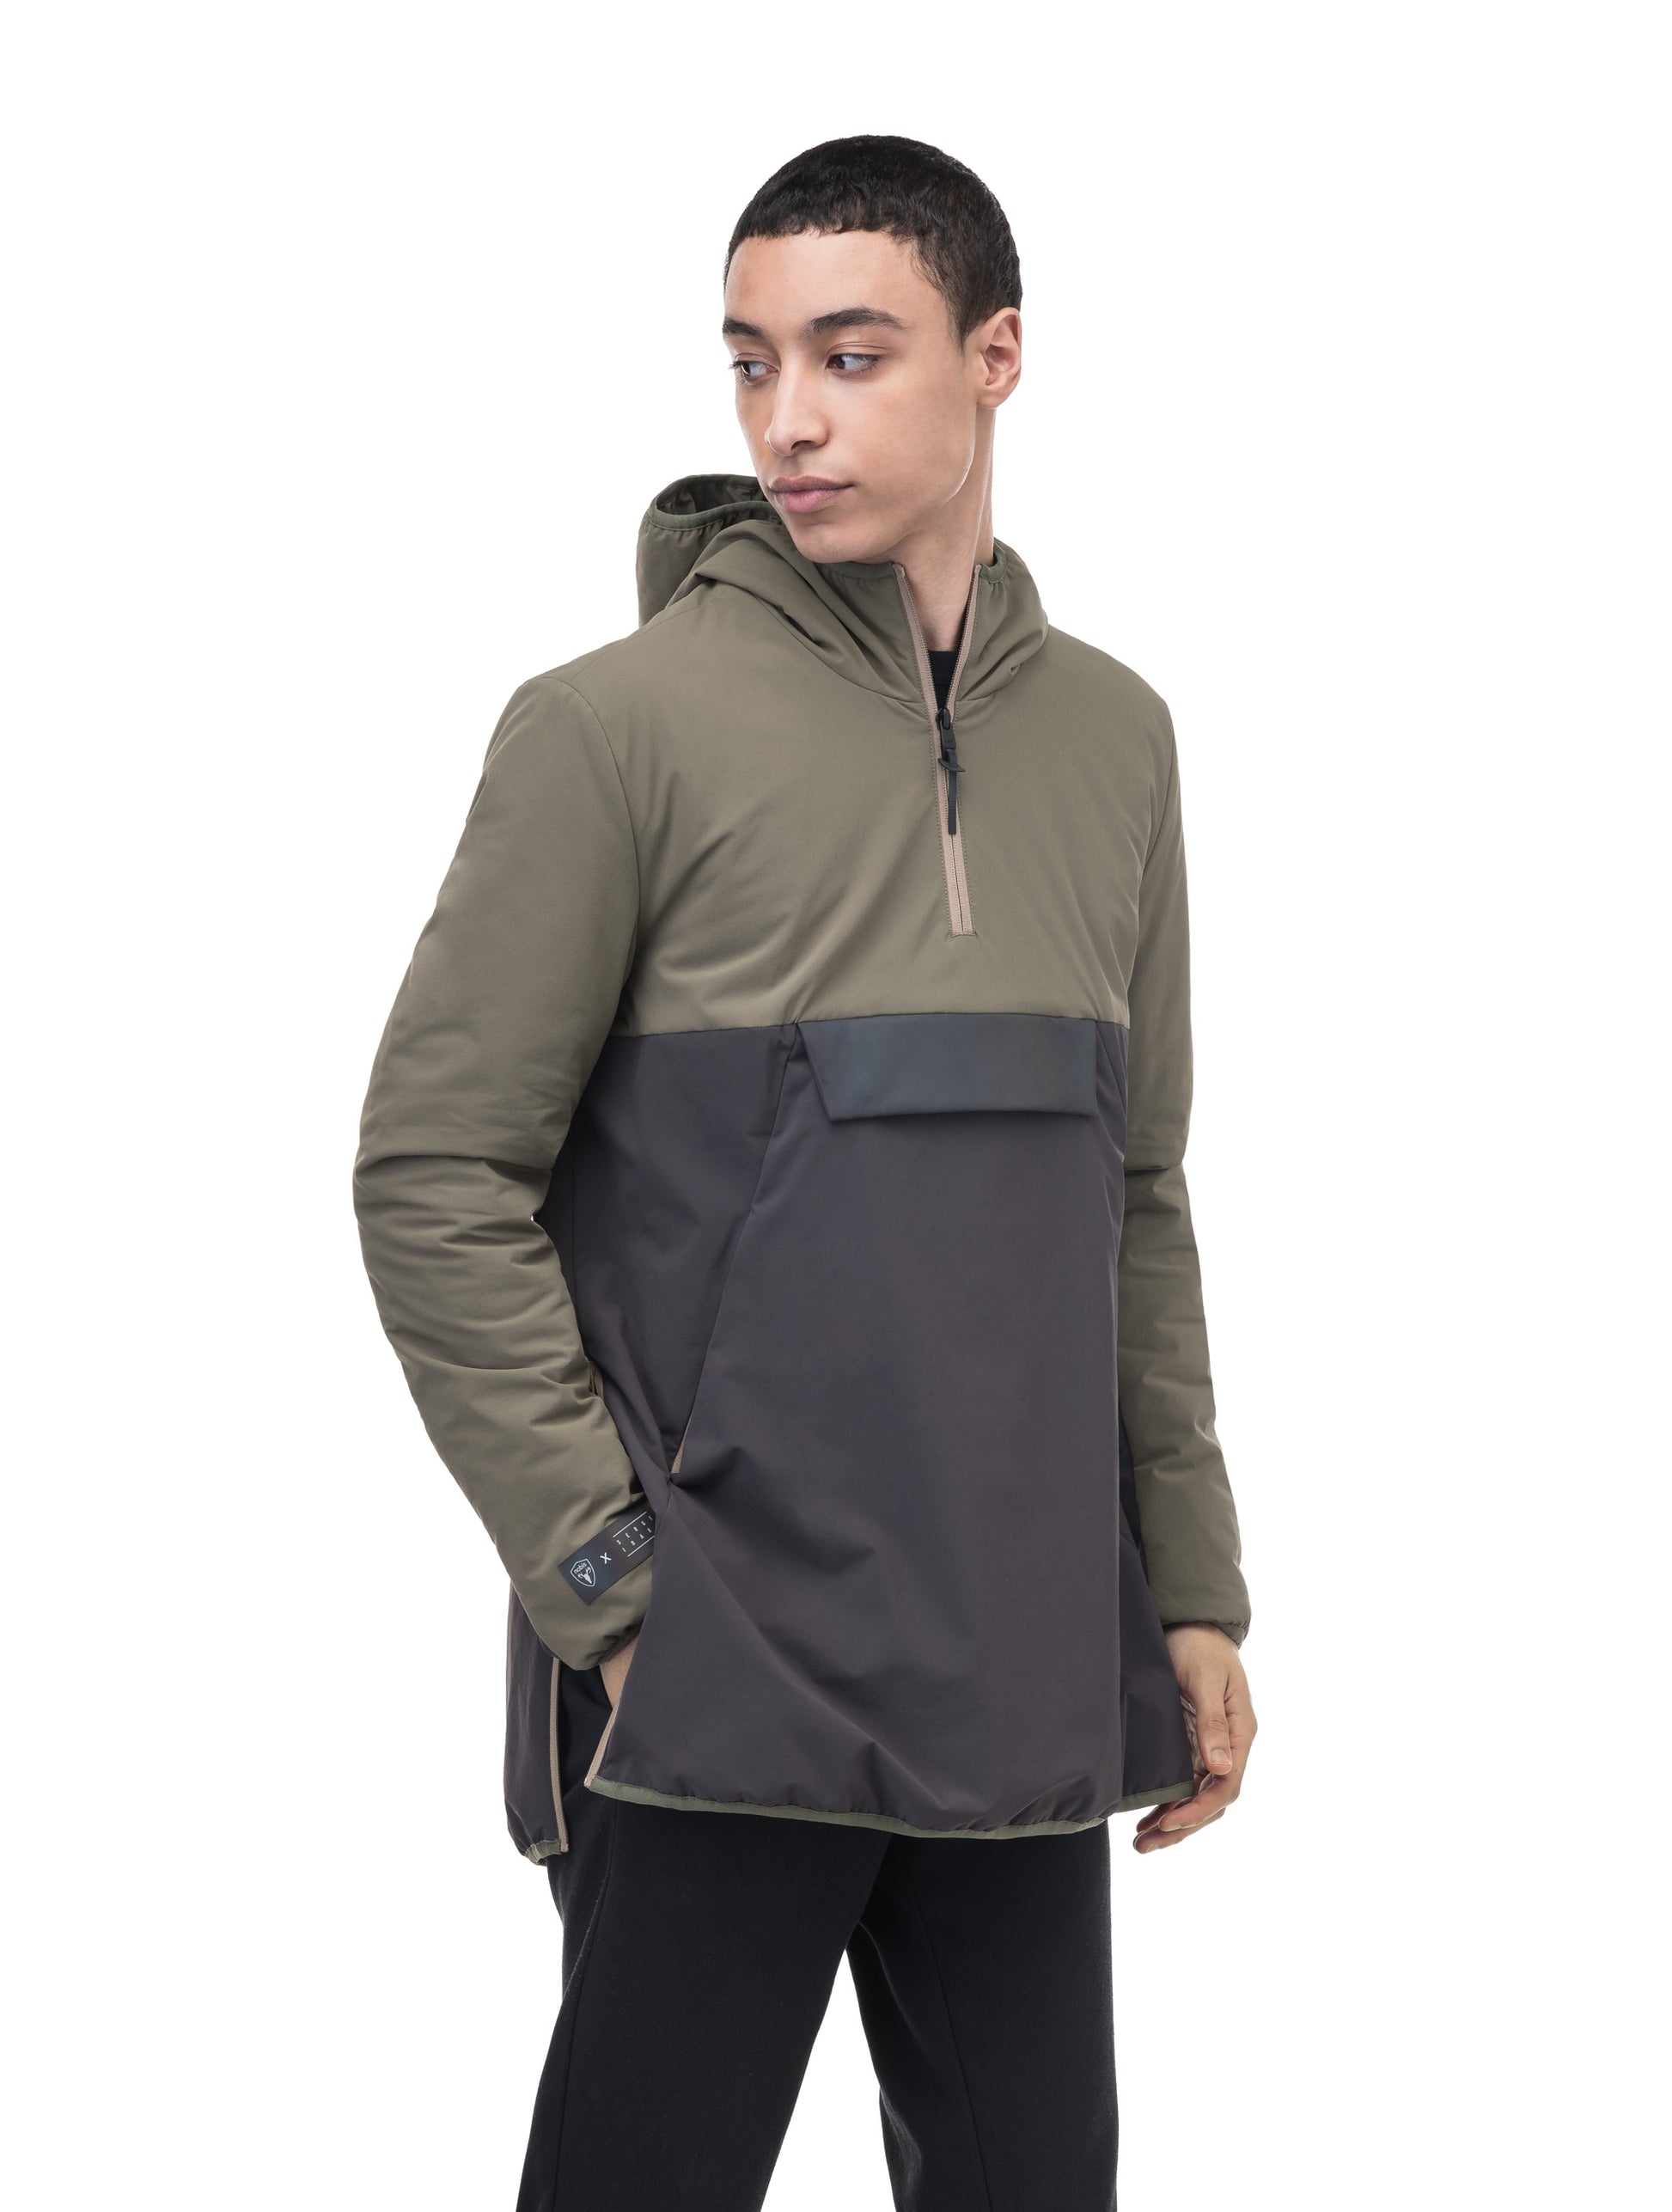 Unisex thigh length hooded anorak with vertical zipper along collar, side zippers along torso, and centre zipper pouch with a reflective flap, in Dusty Olive/Licorice